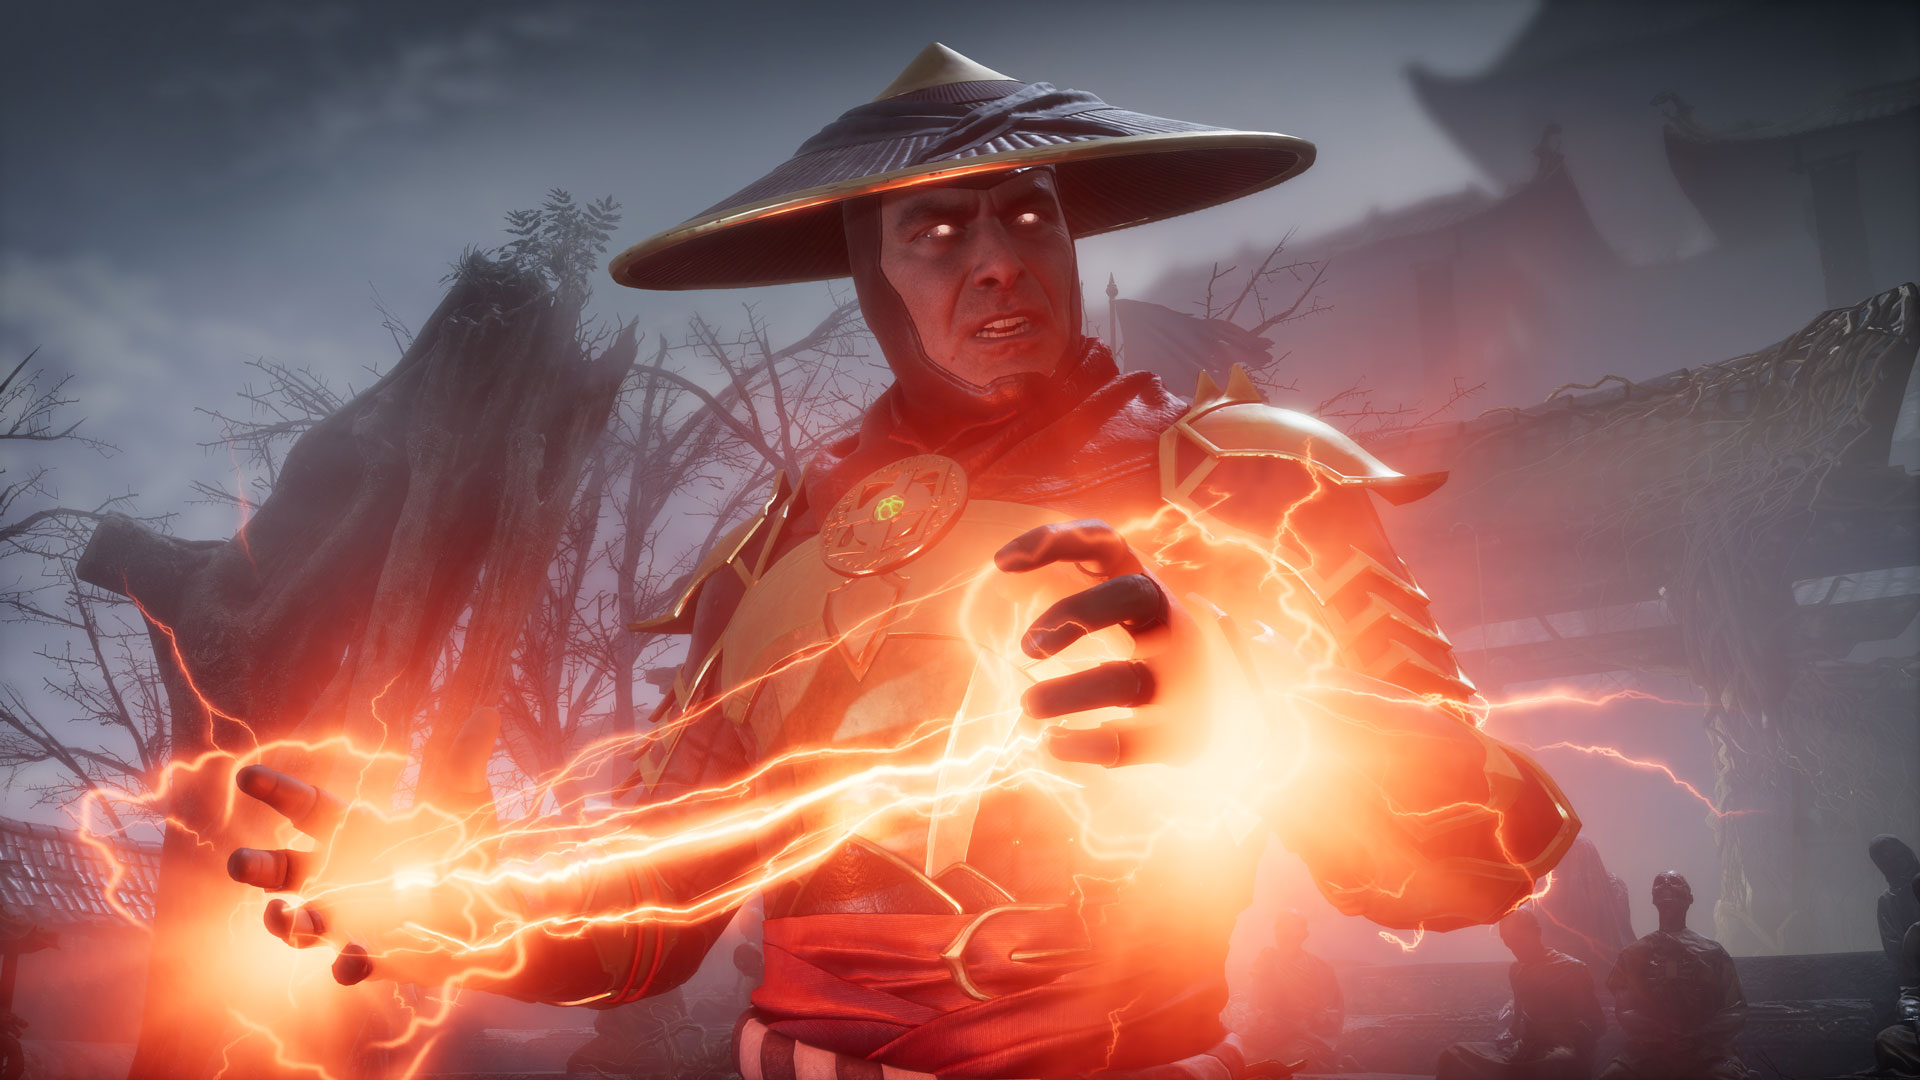 Mortal Kombat 11 players will get free currency to deal with Towers of Time